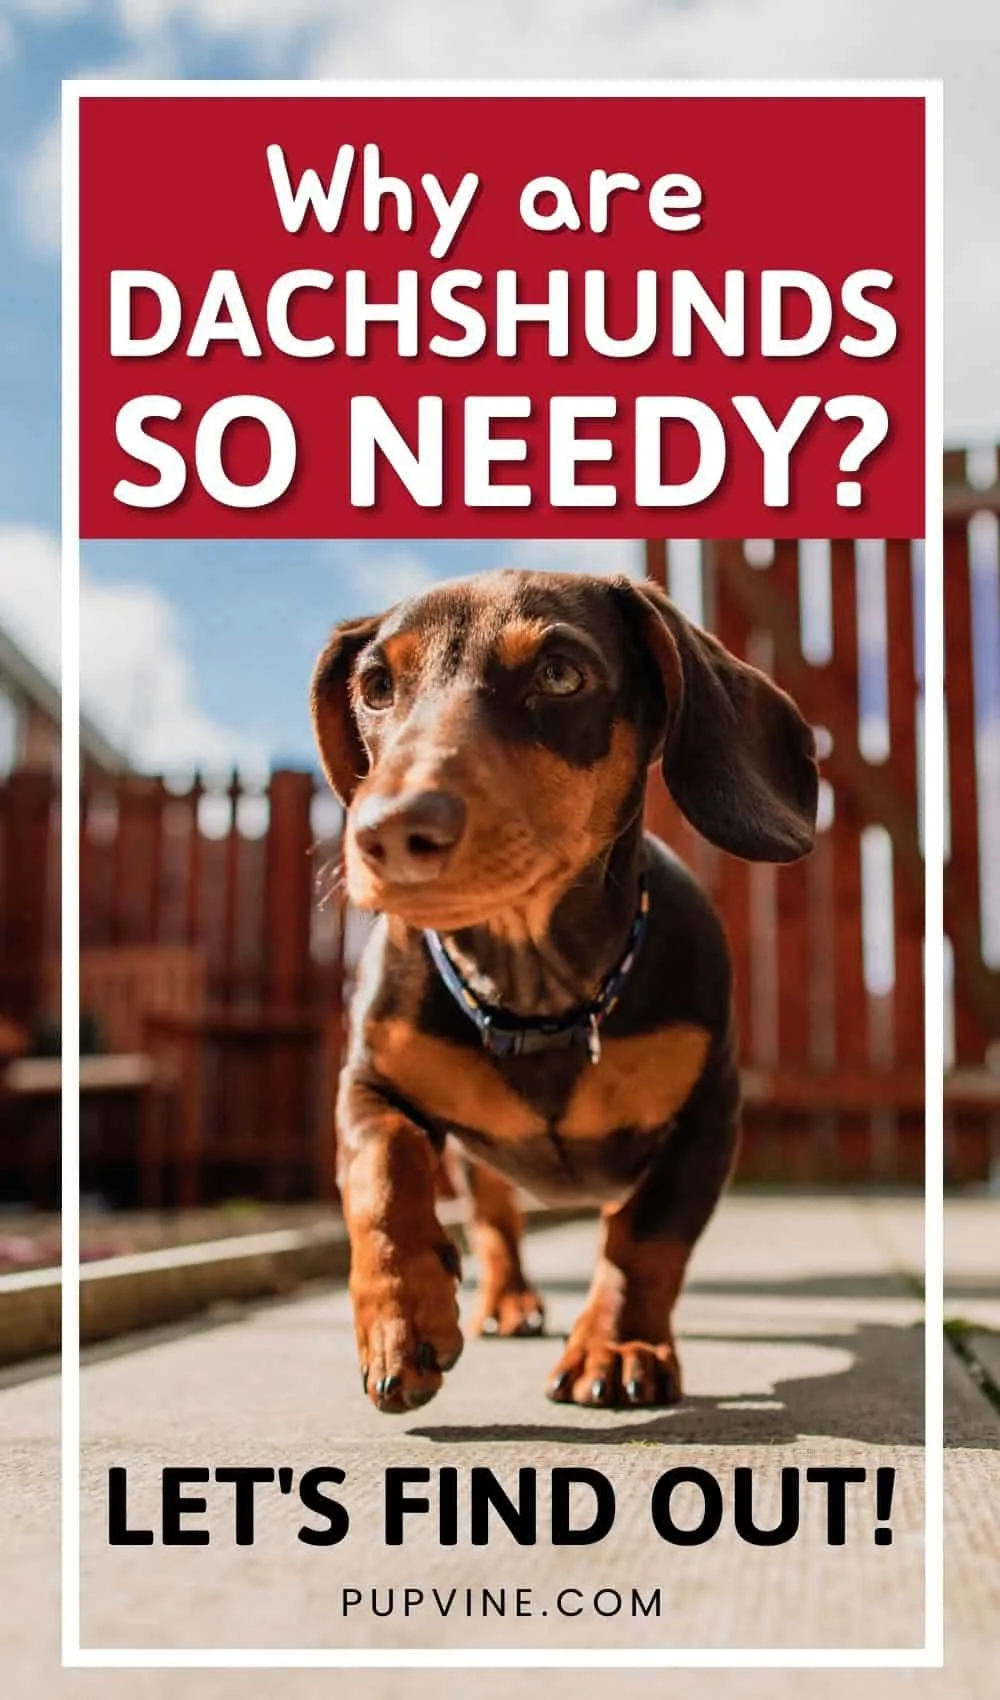 Why Are Dachshunds So Needy Let's Find Out!